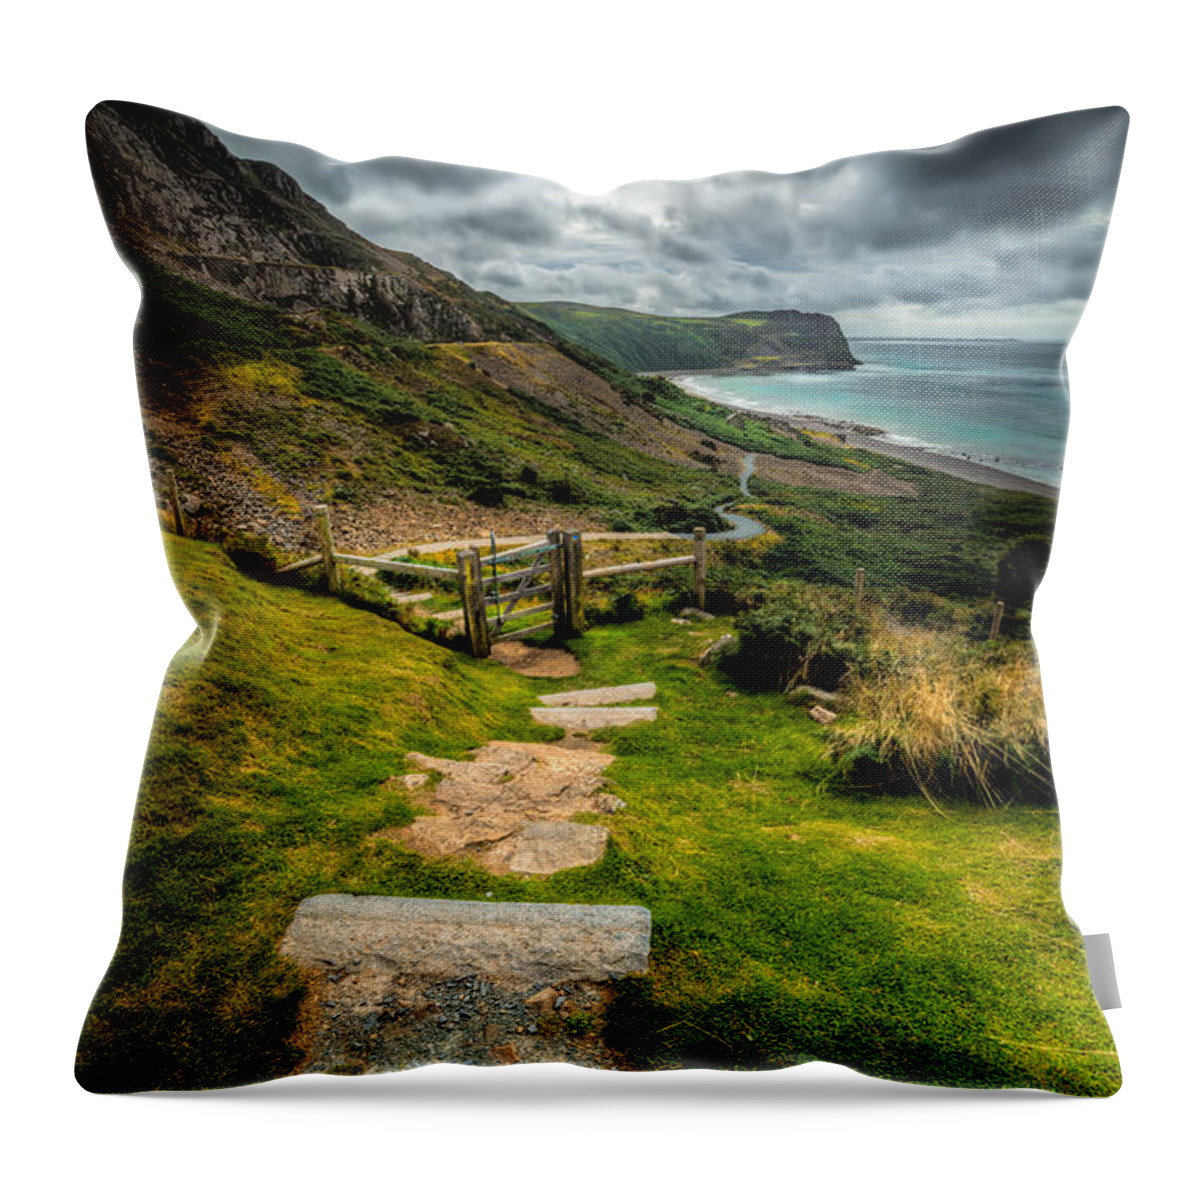 Llyn Peninsula Throw Pillow featuring the photograph Follow The Path by Adrian Evans